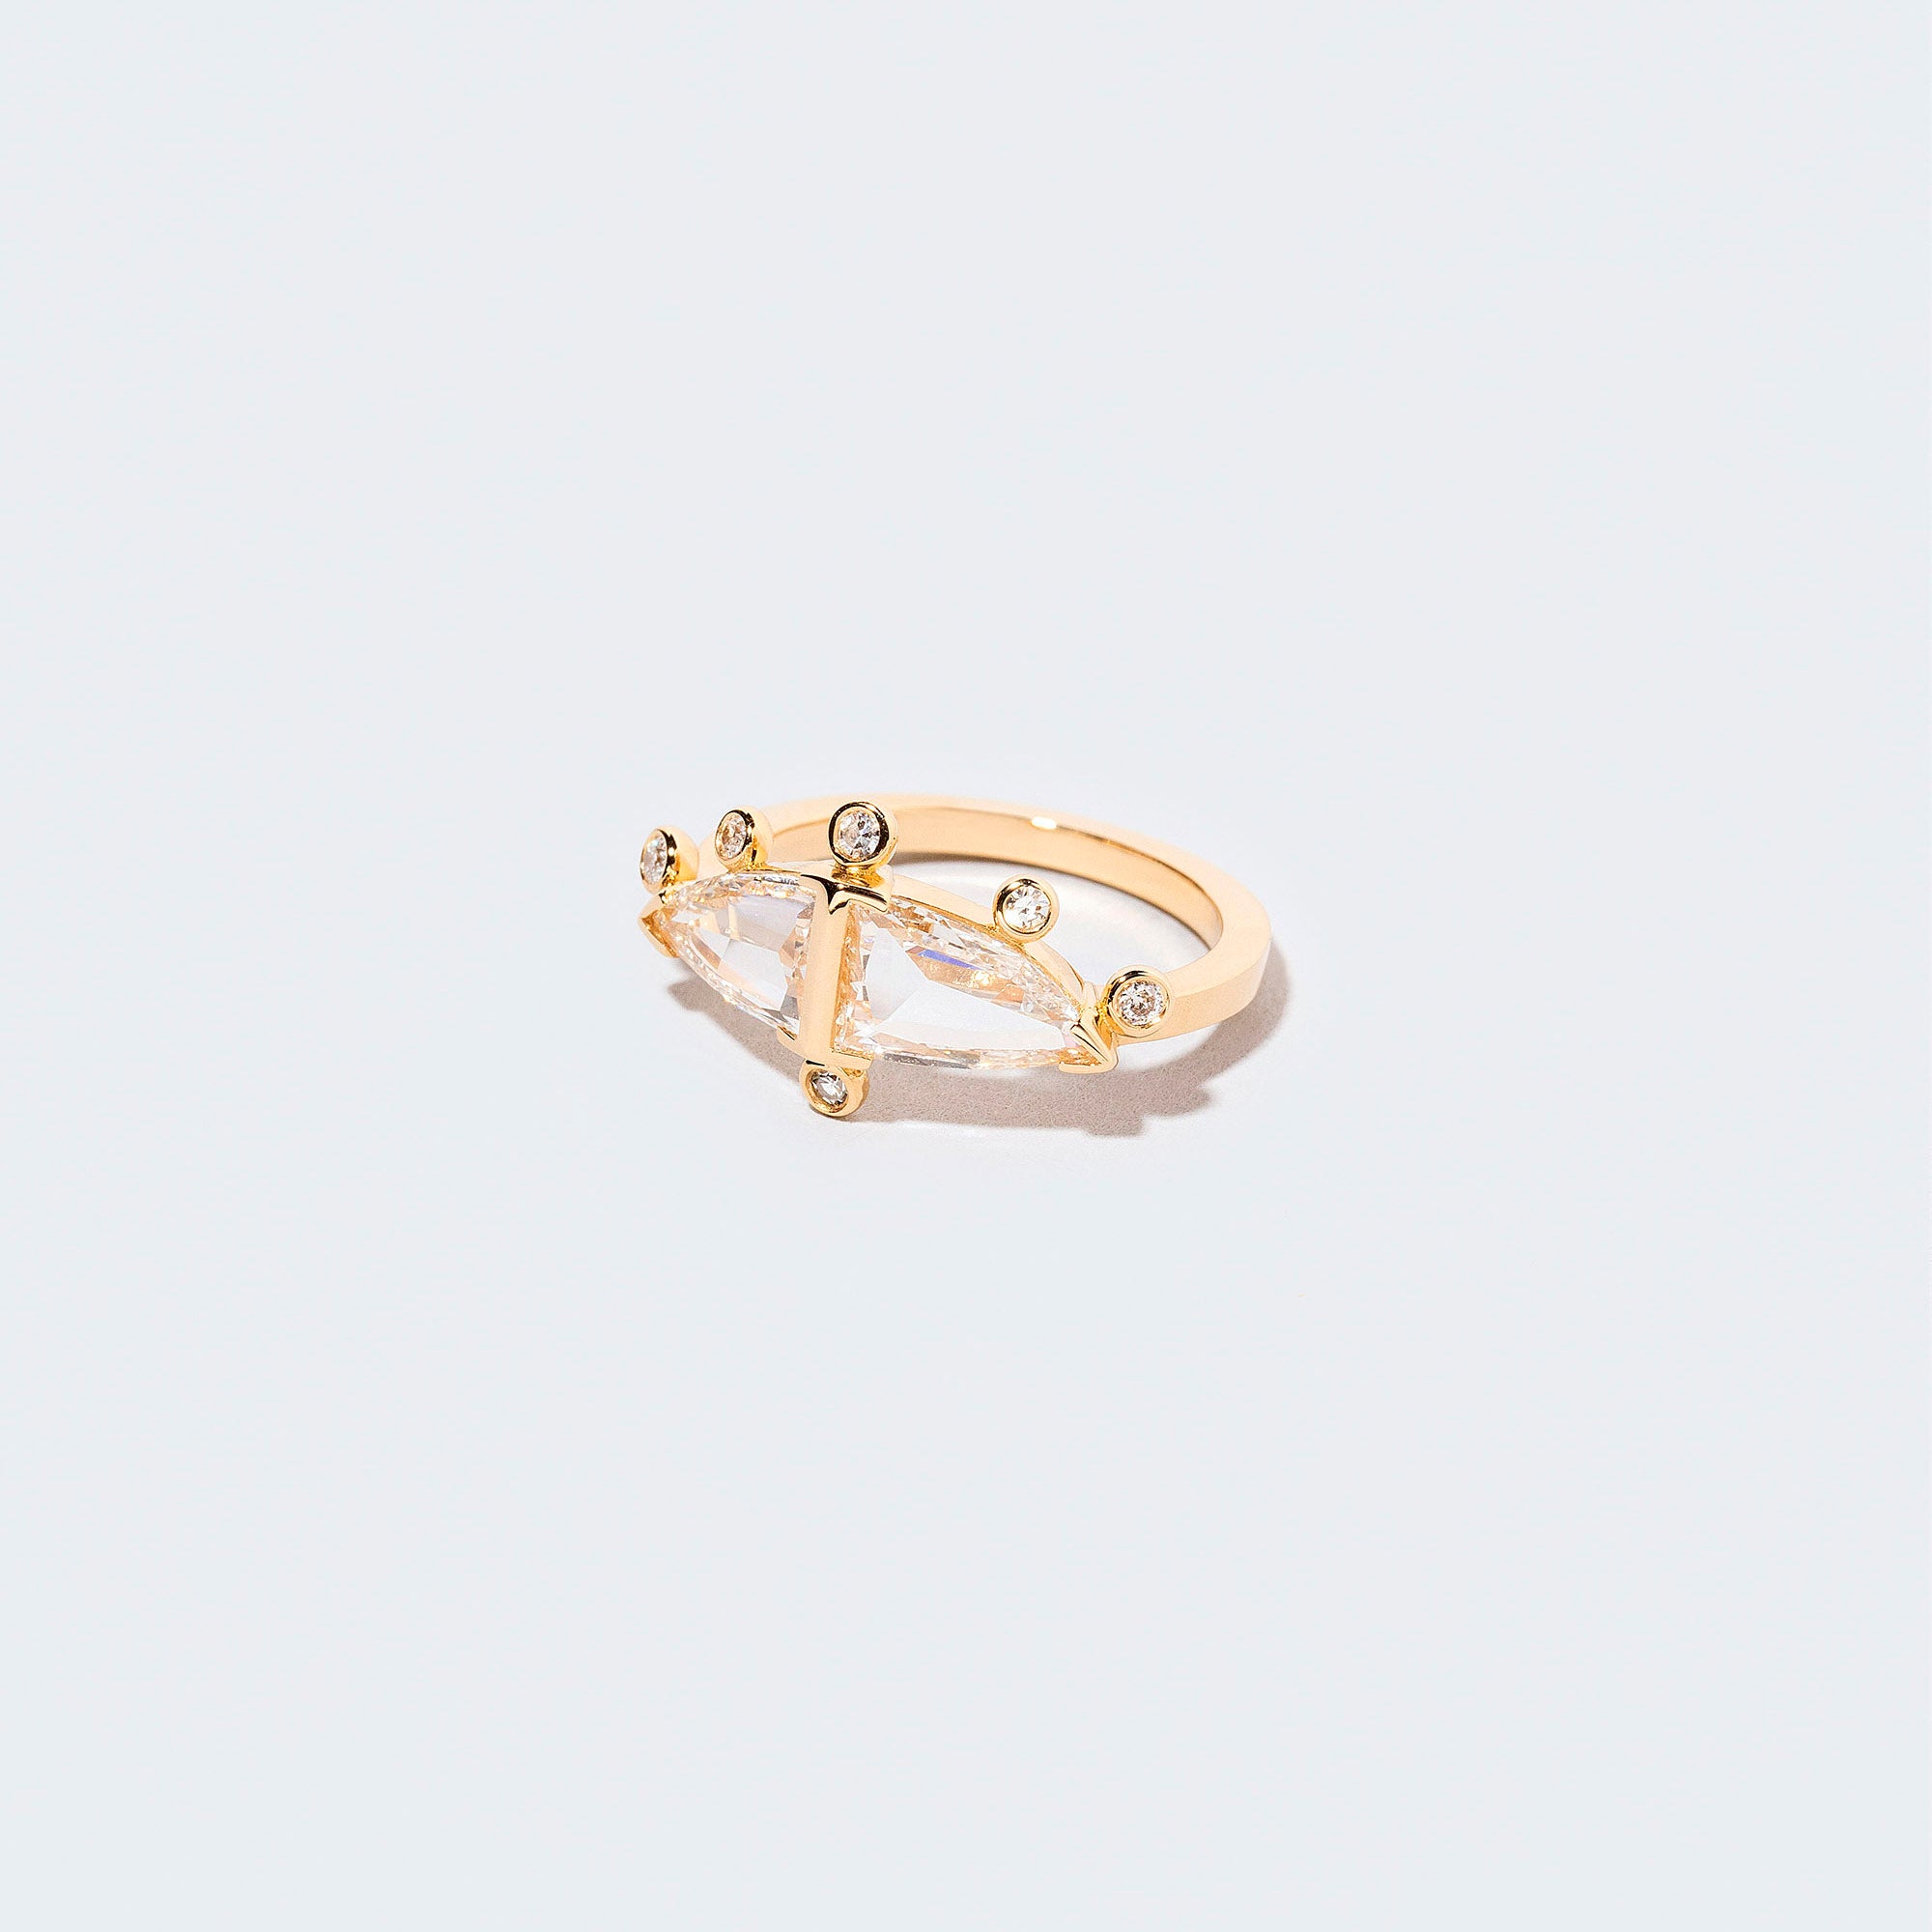 product_details:: Visible Reality Ring on light color background.